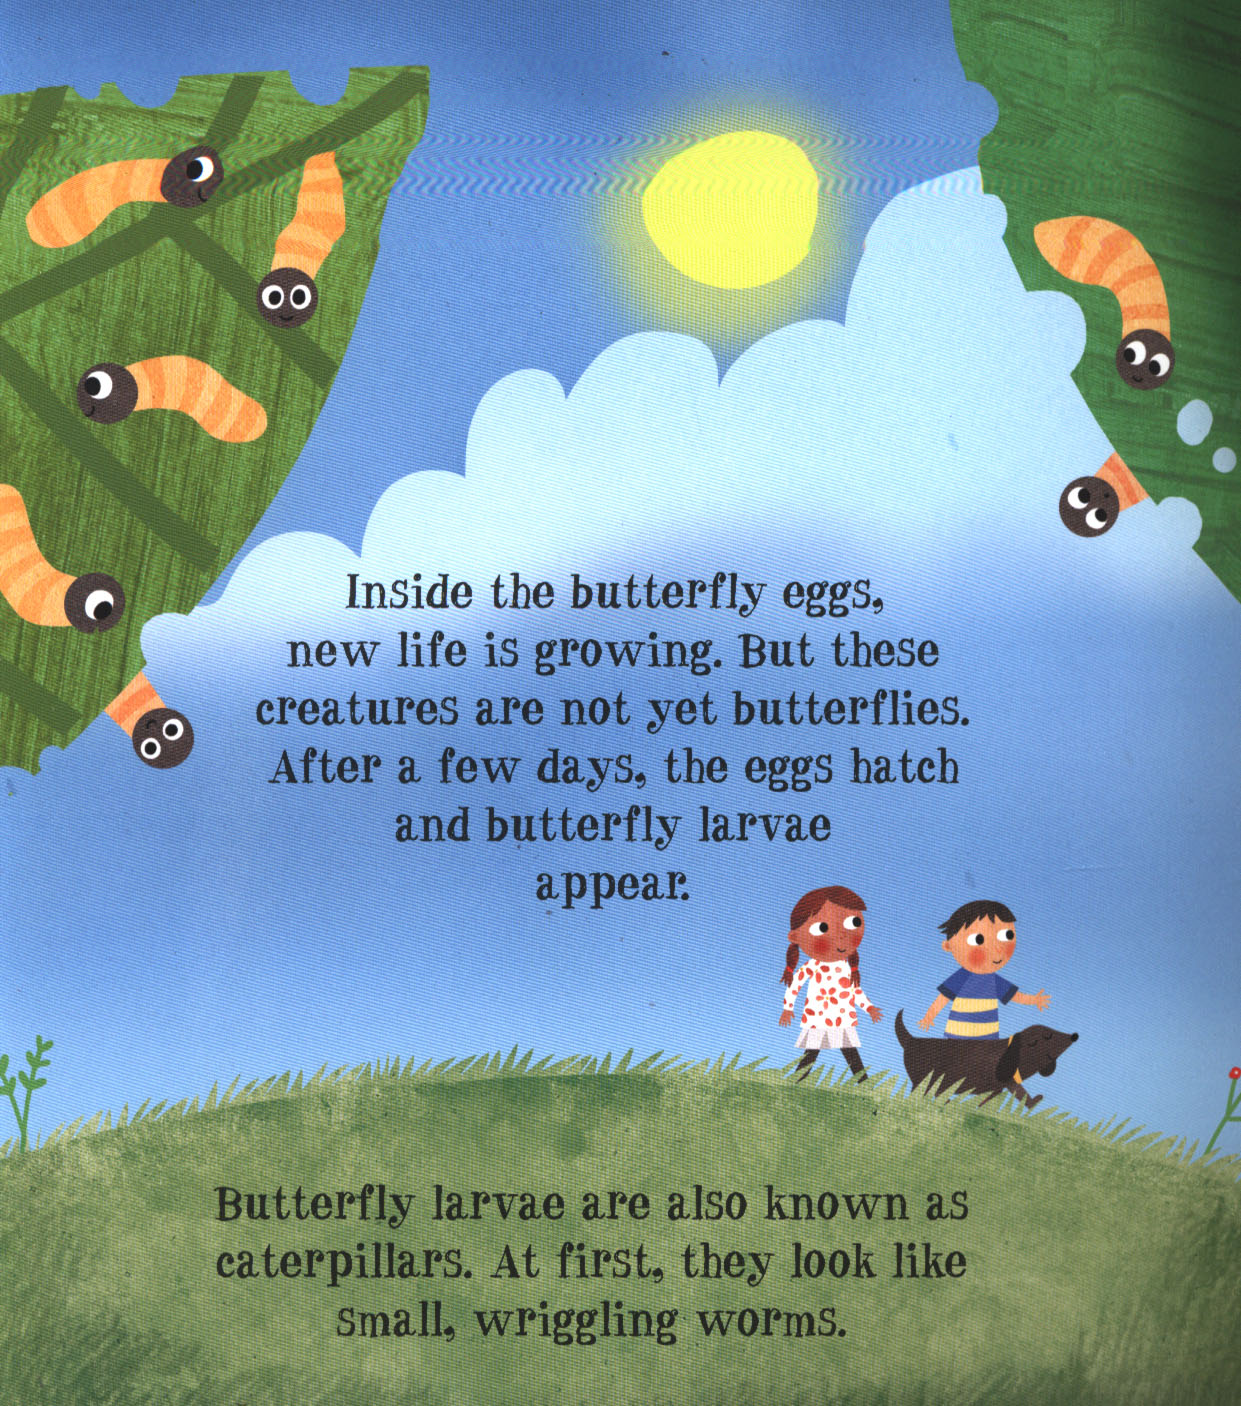 The amazing life cycle of butterflies by Barnham, Kay (9780750299565 ...